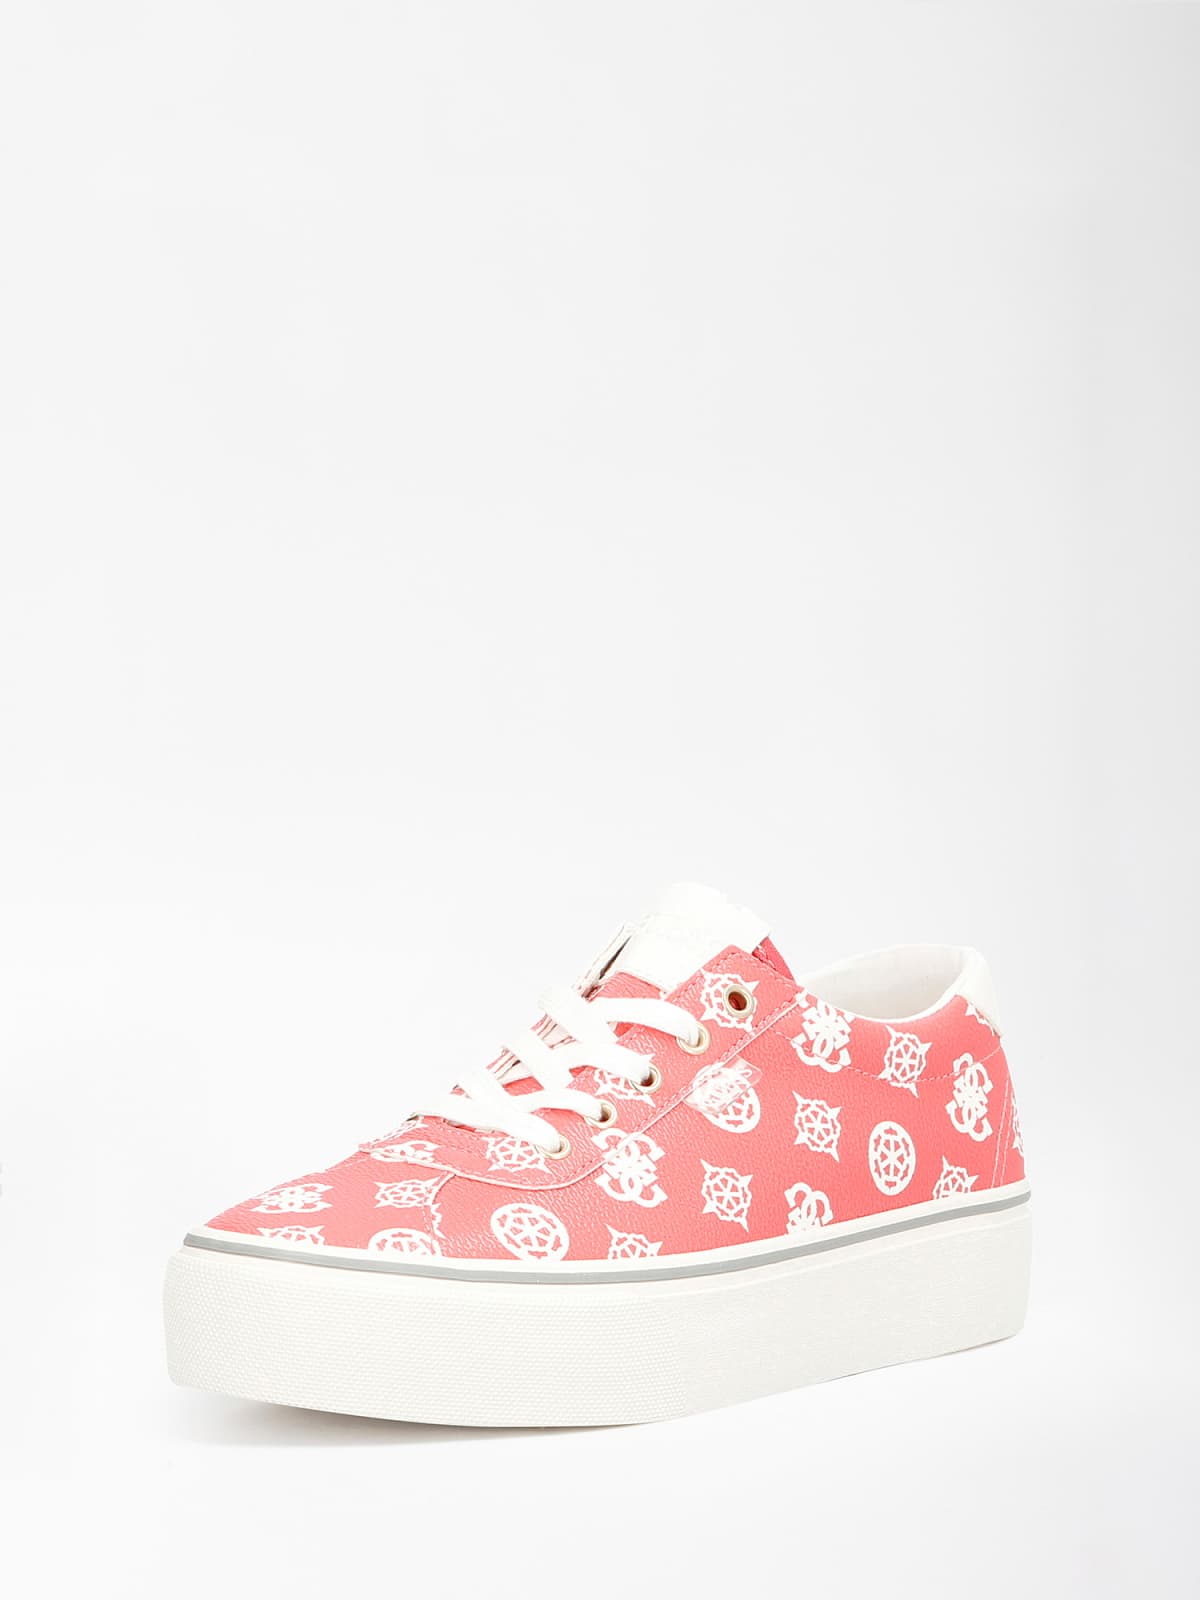 Guess Sanam 4G Peony Logo Sneaker | Rather Saucy